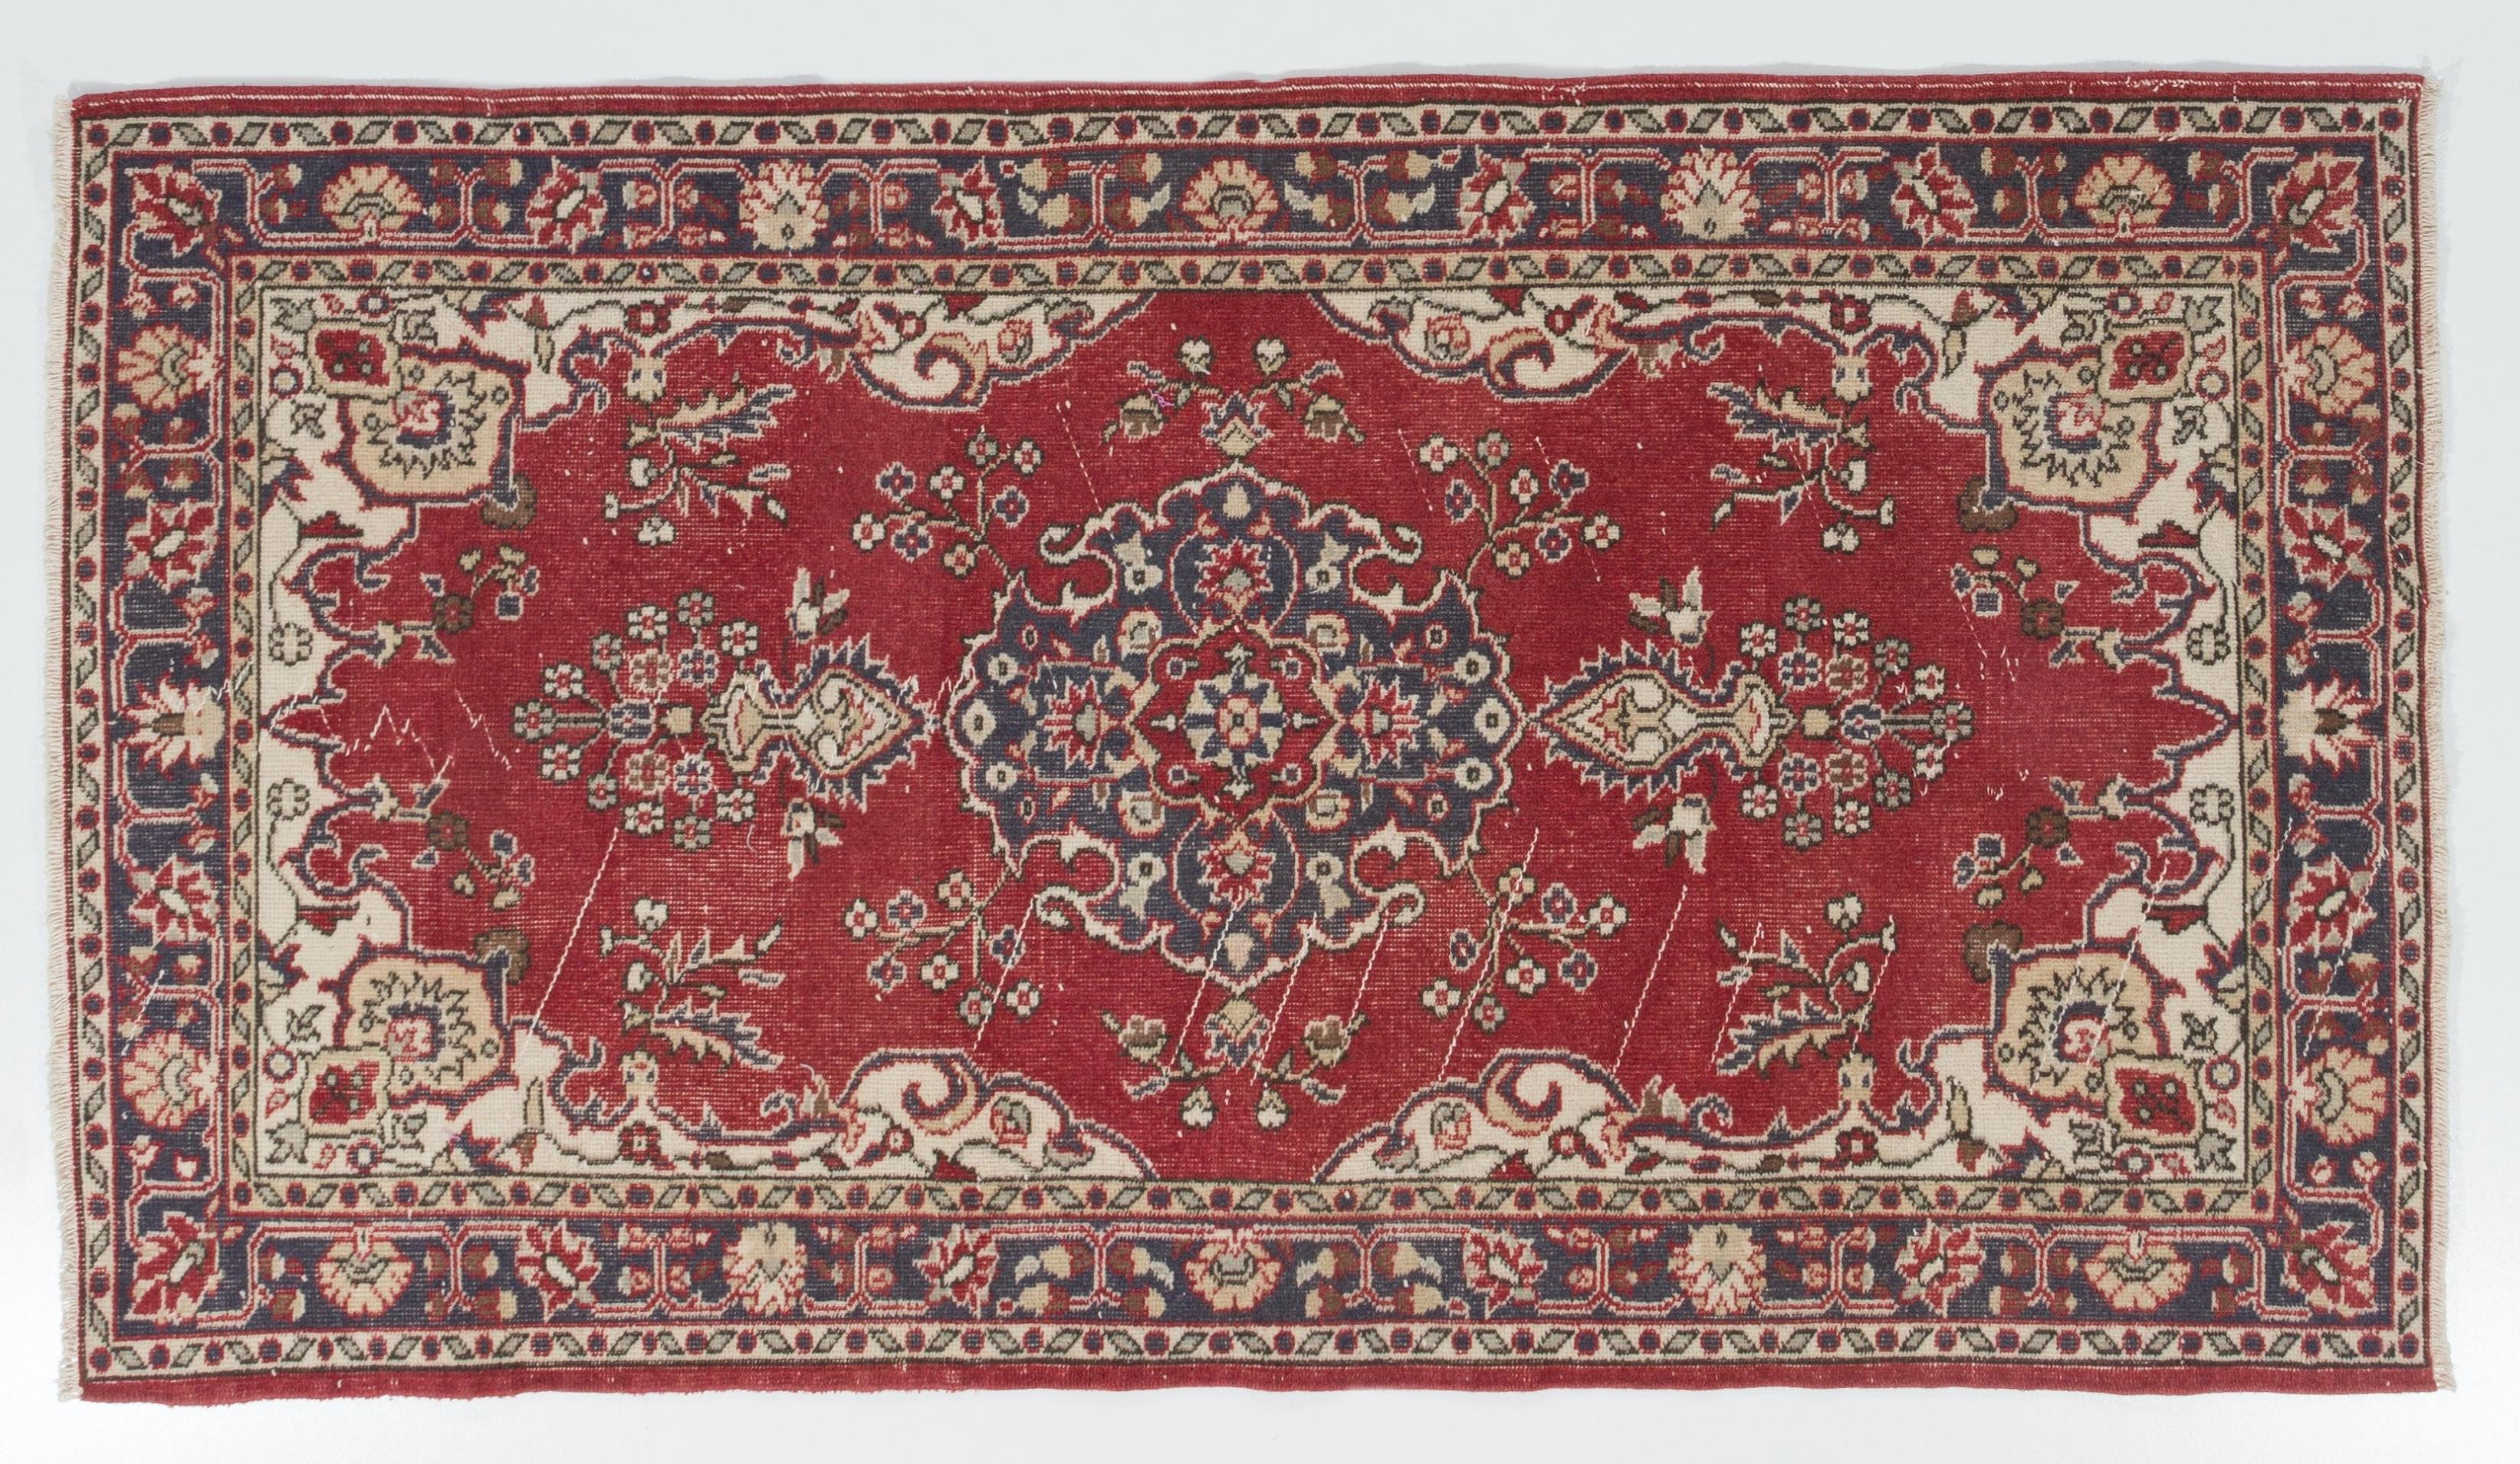 4x7 Ft One-of-a-Kind Vintage Hand-Knotted Anatolian Wool Rug in Red and Ivory In Good Condition For Sale In Philadelphia, PA